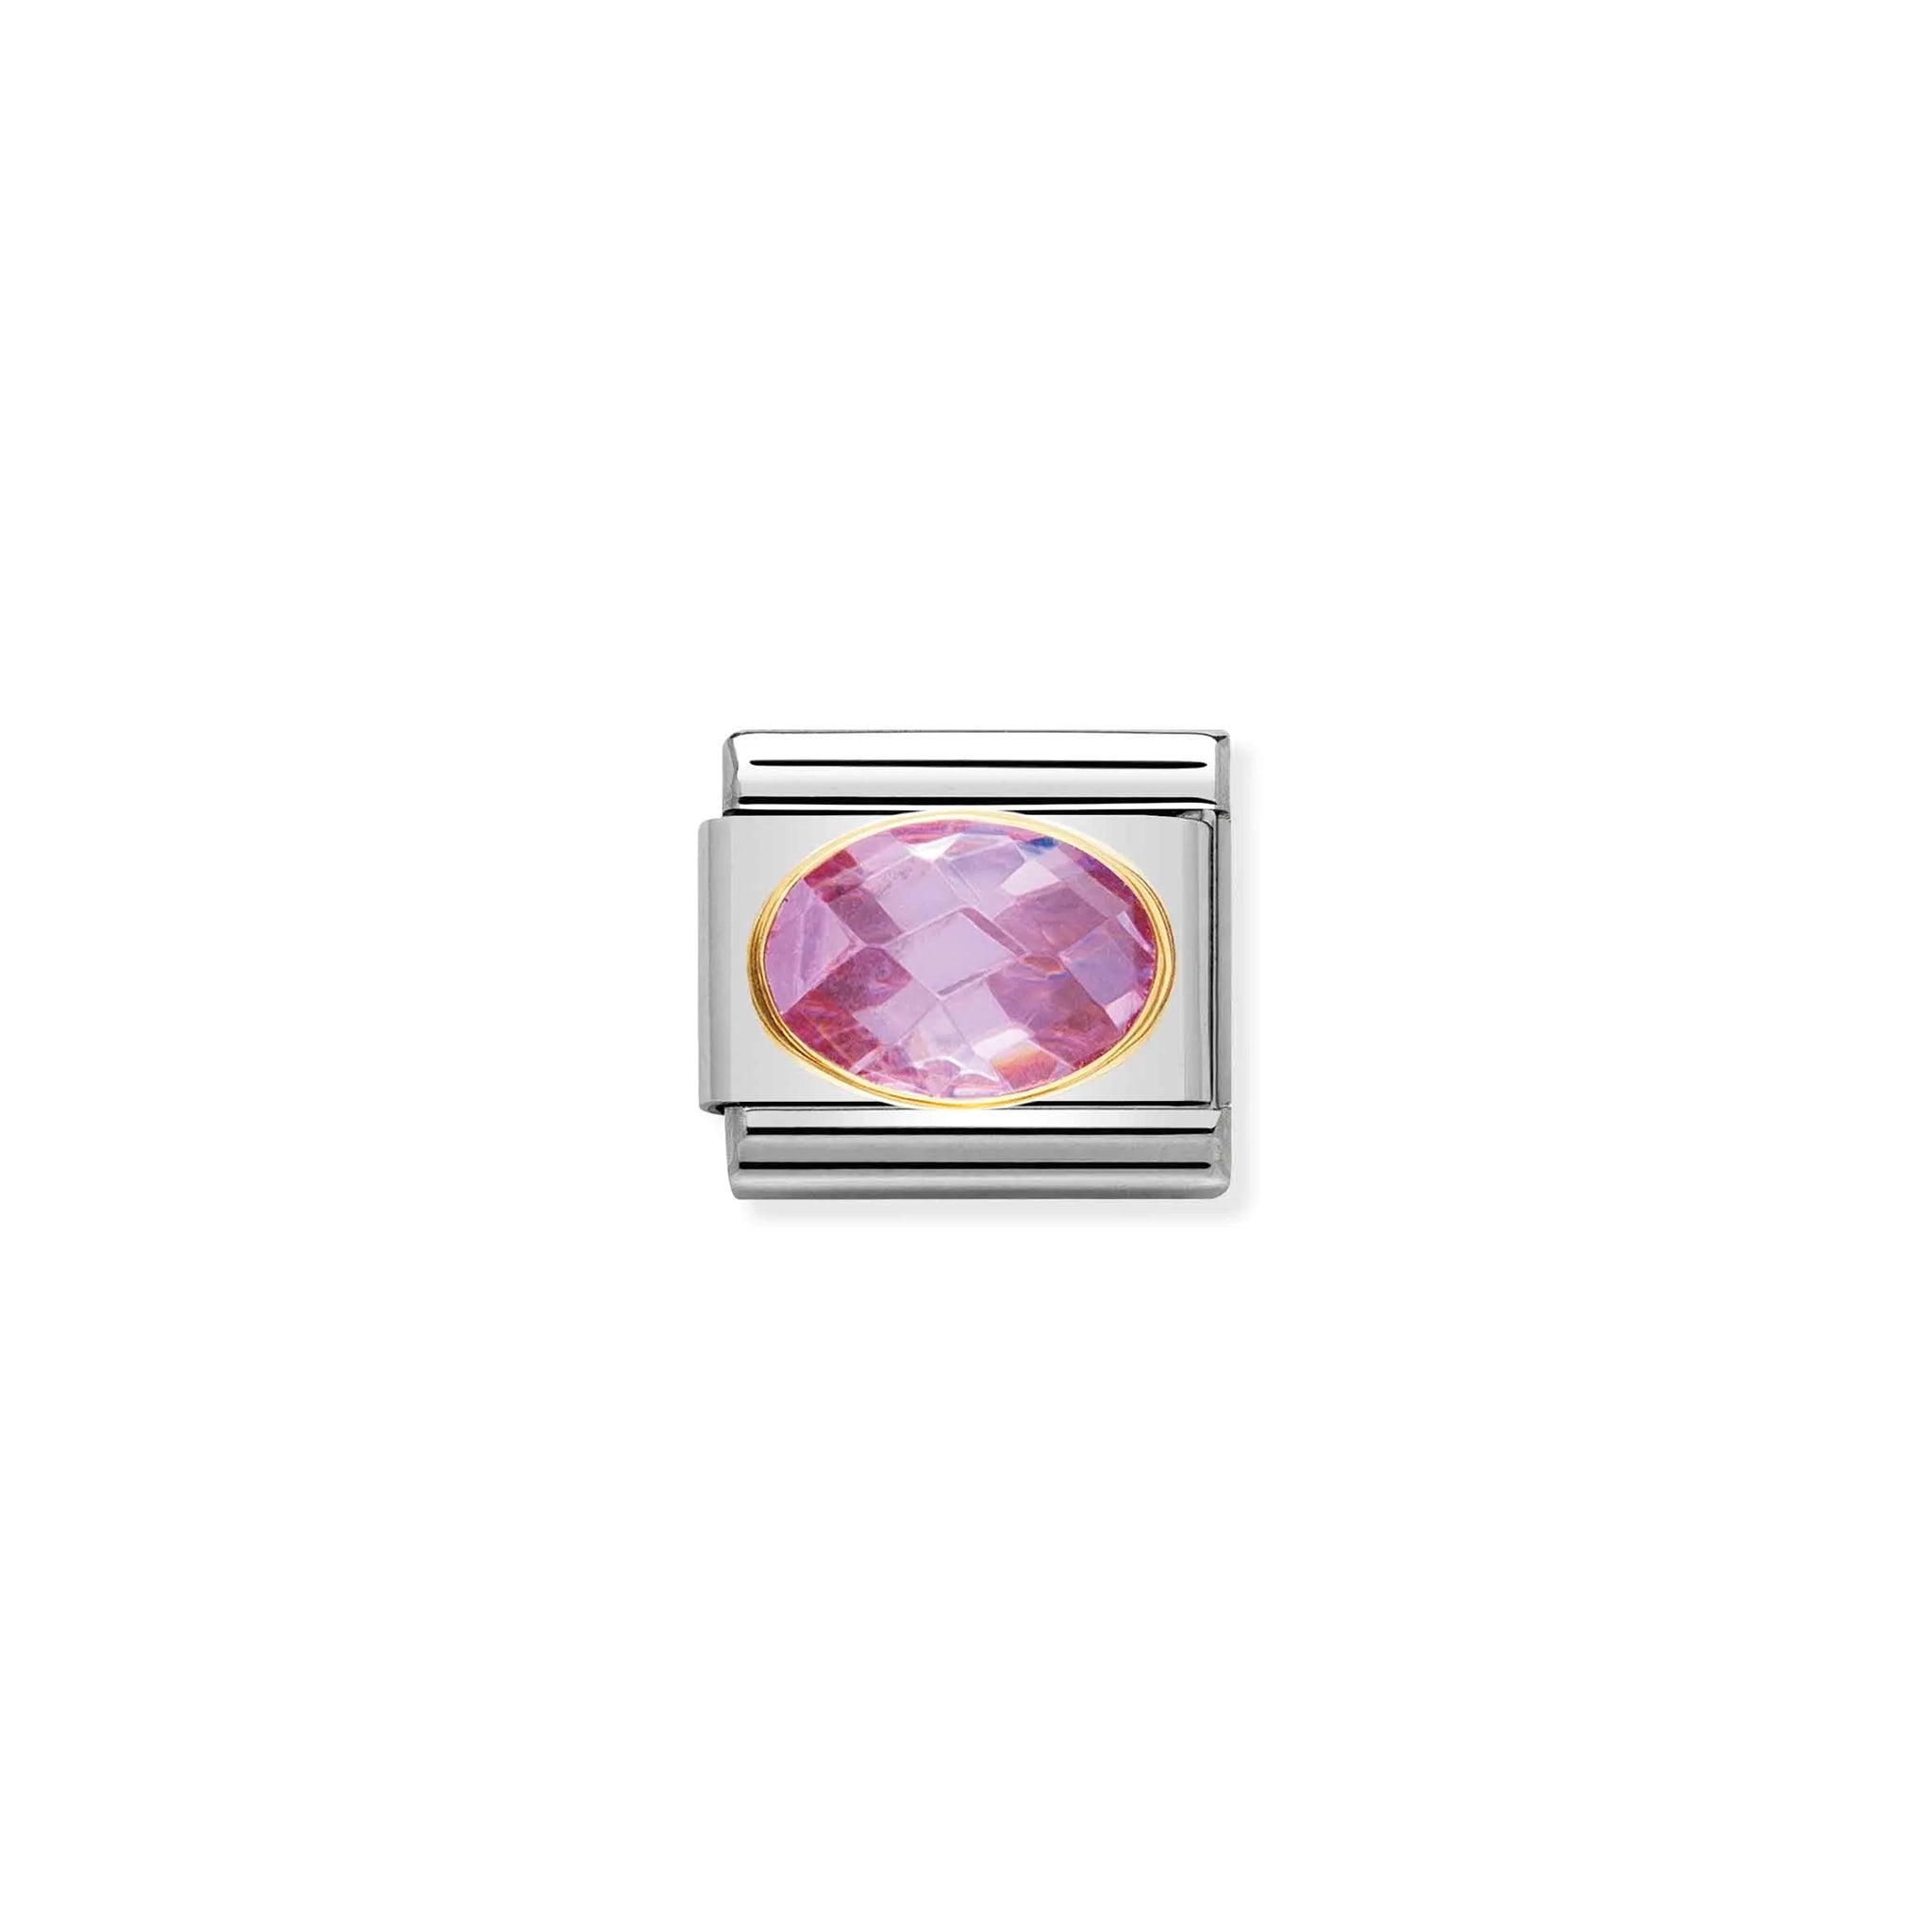 Nomination charm link faceted pink oval cubic zirconia stone with gold surround